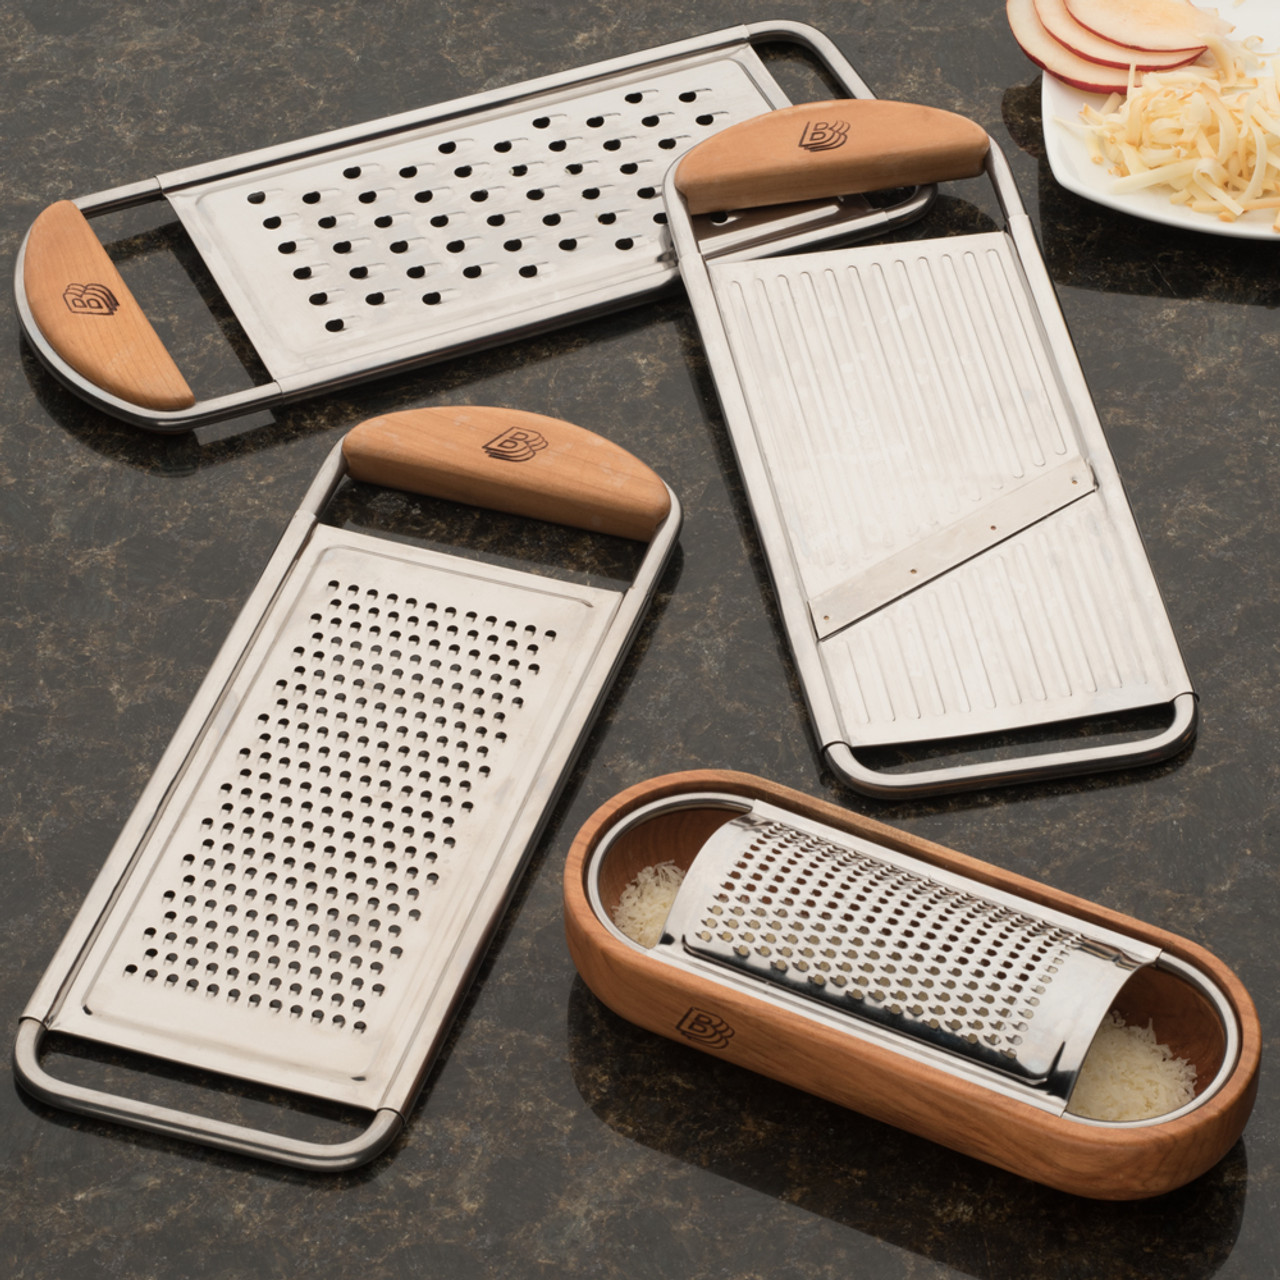 Authentic Italian Cheese Grater